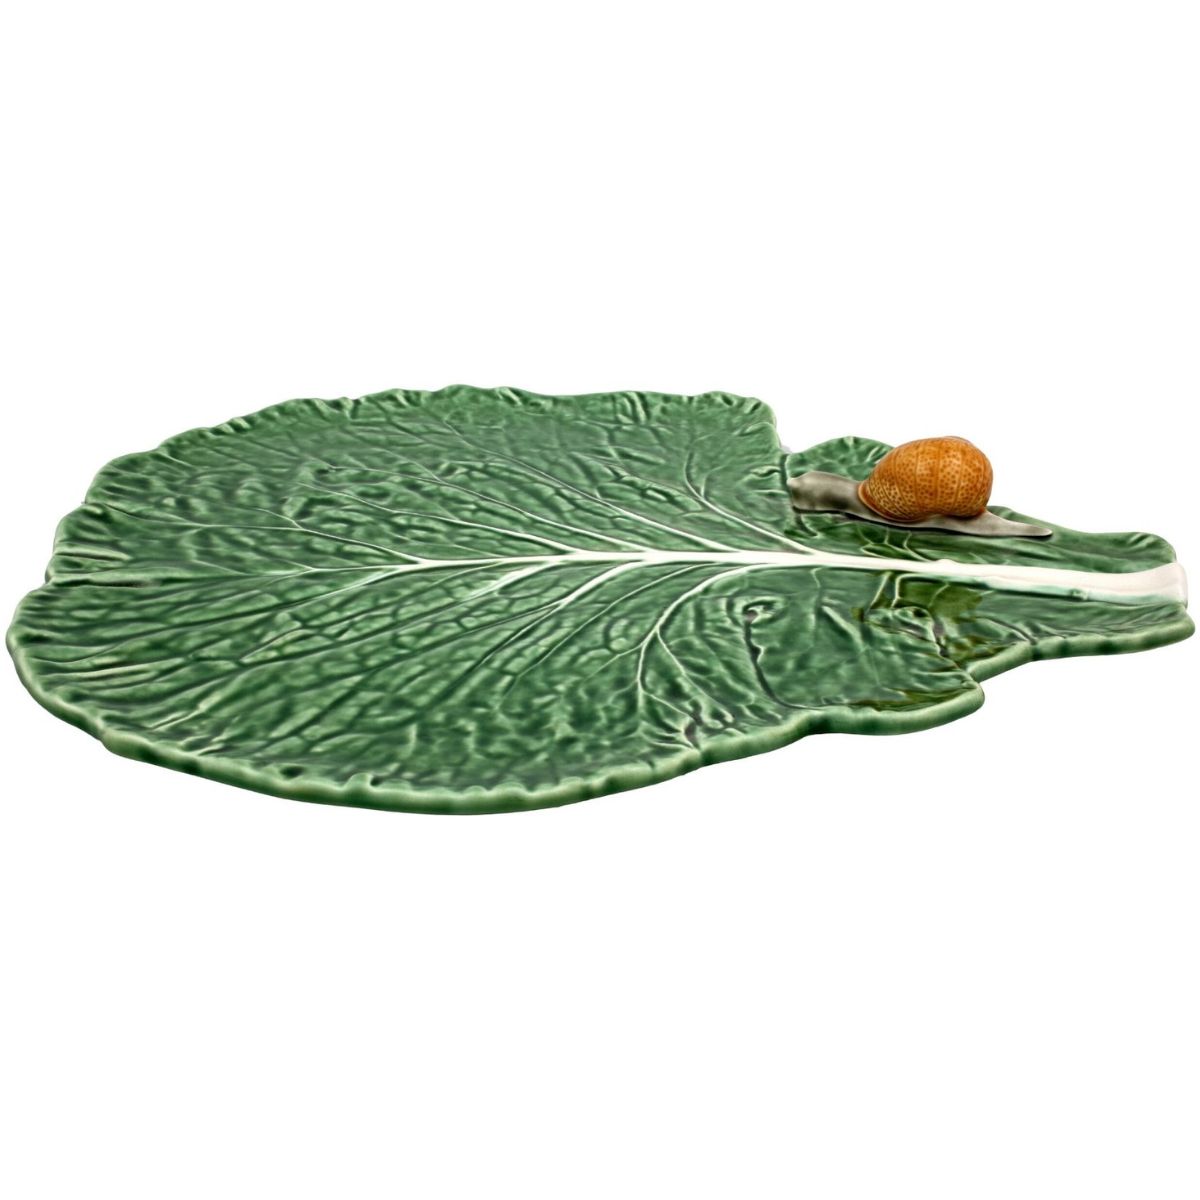 Cabbage Leaf With Snail